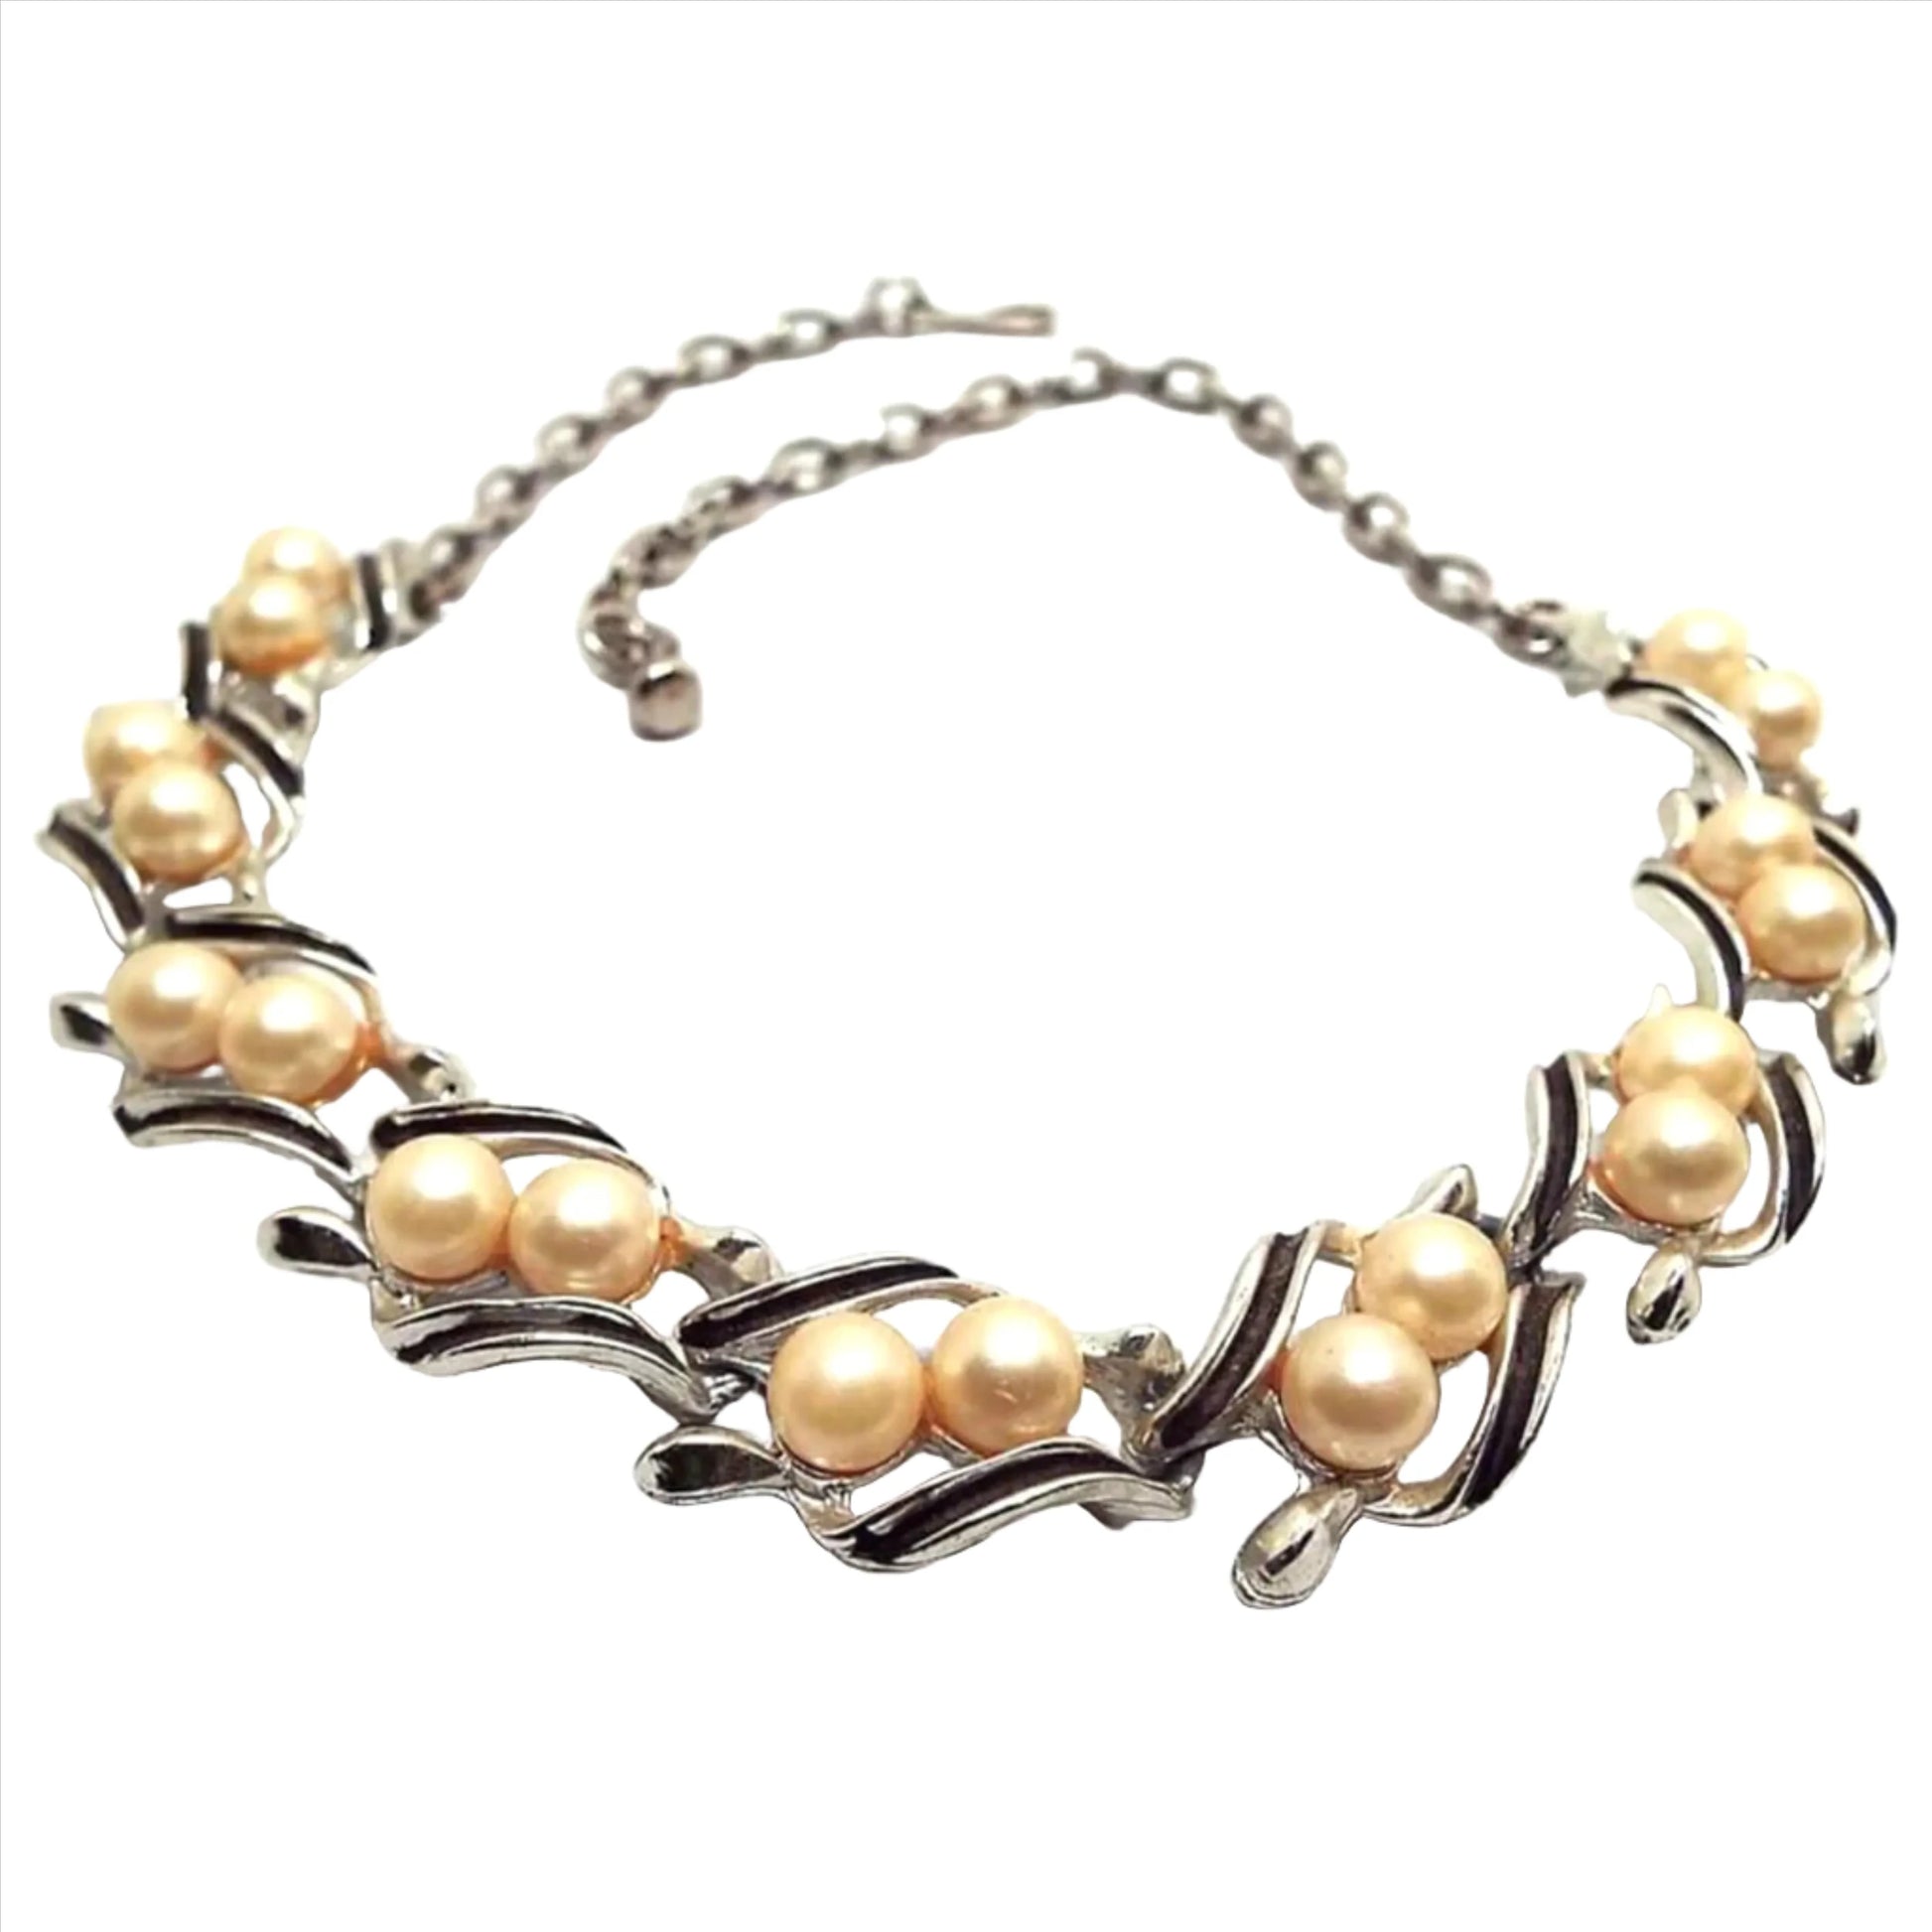 Front view of the Mid Century vintage faux pearl link necklace. The metal is silver tone in color. Each link has two plastic round imitation pearls in off white color and black painted edges on the metal.